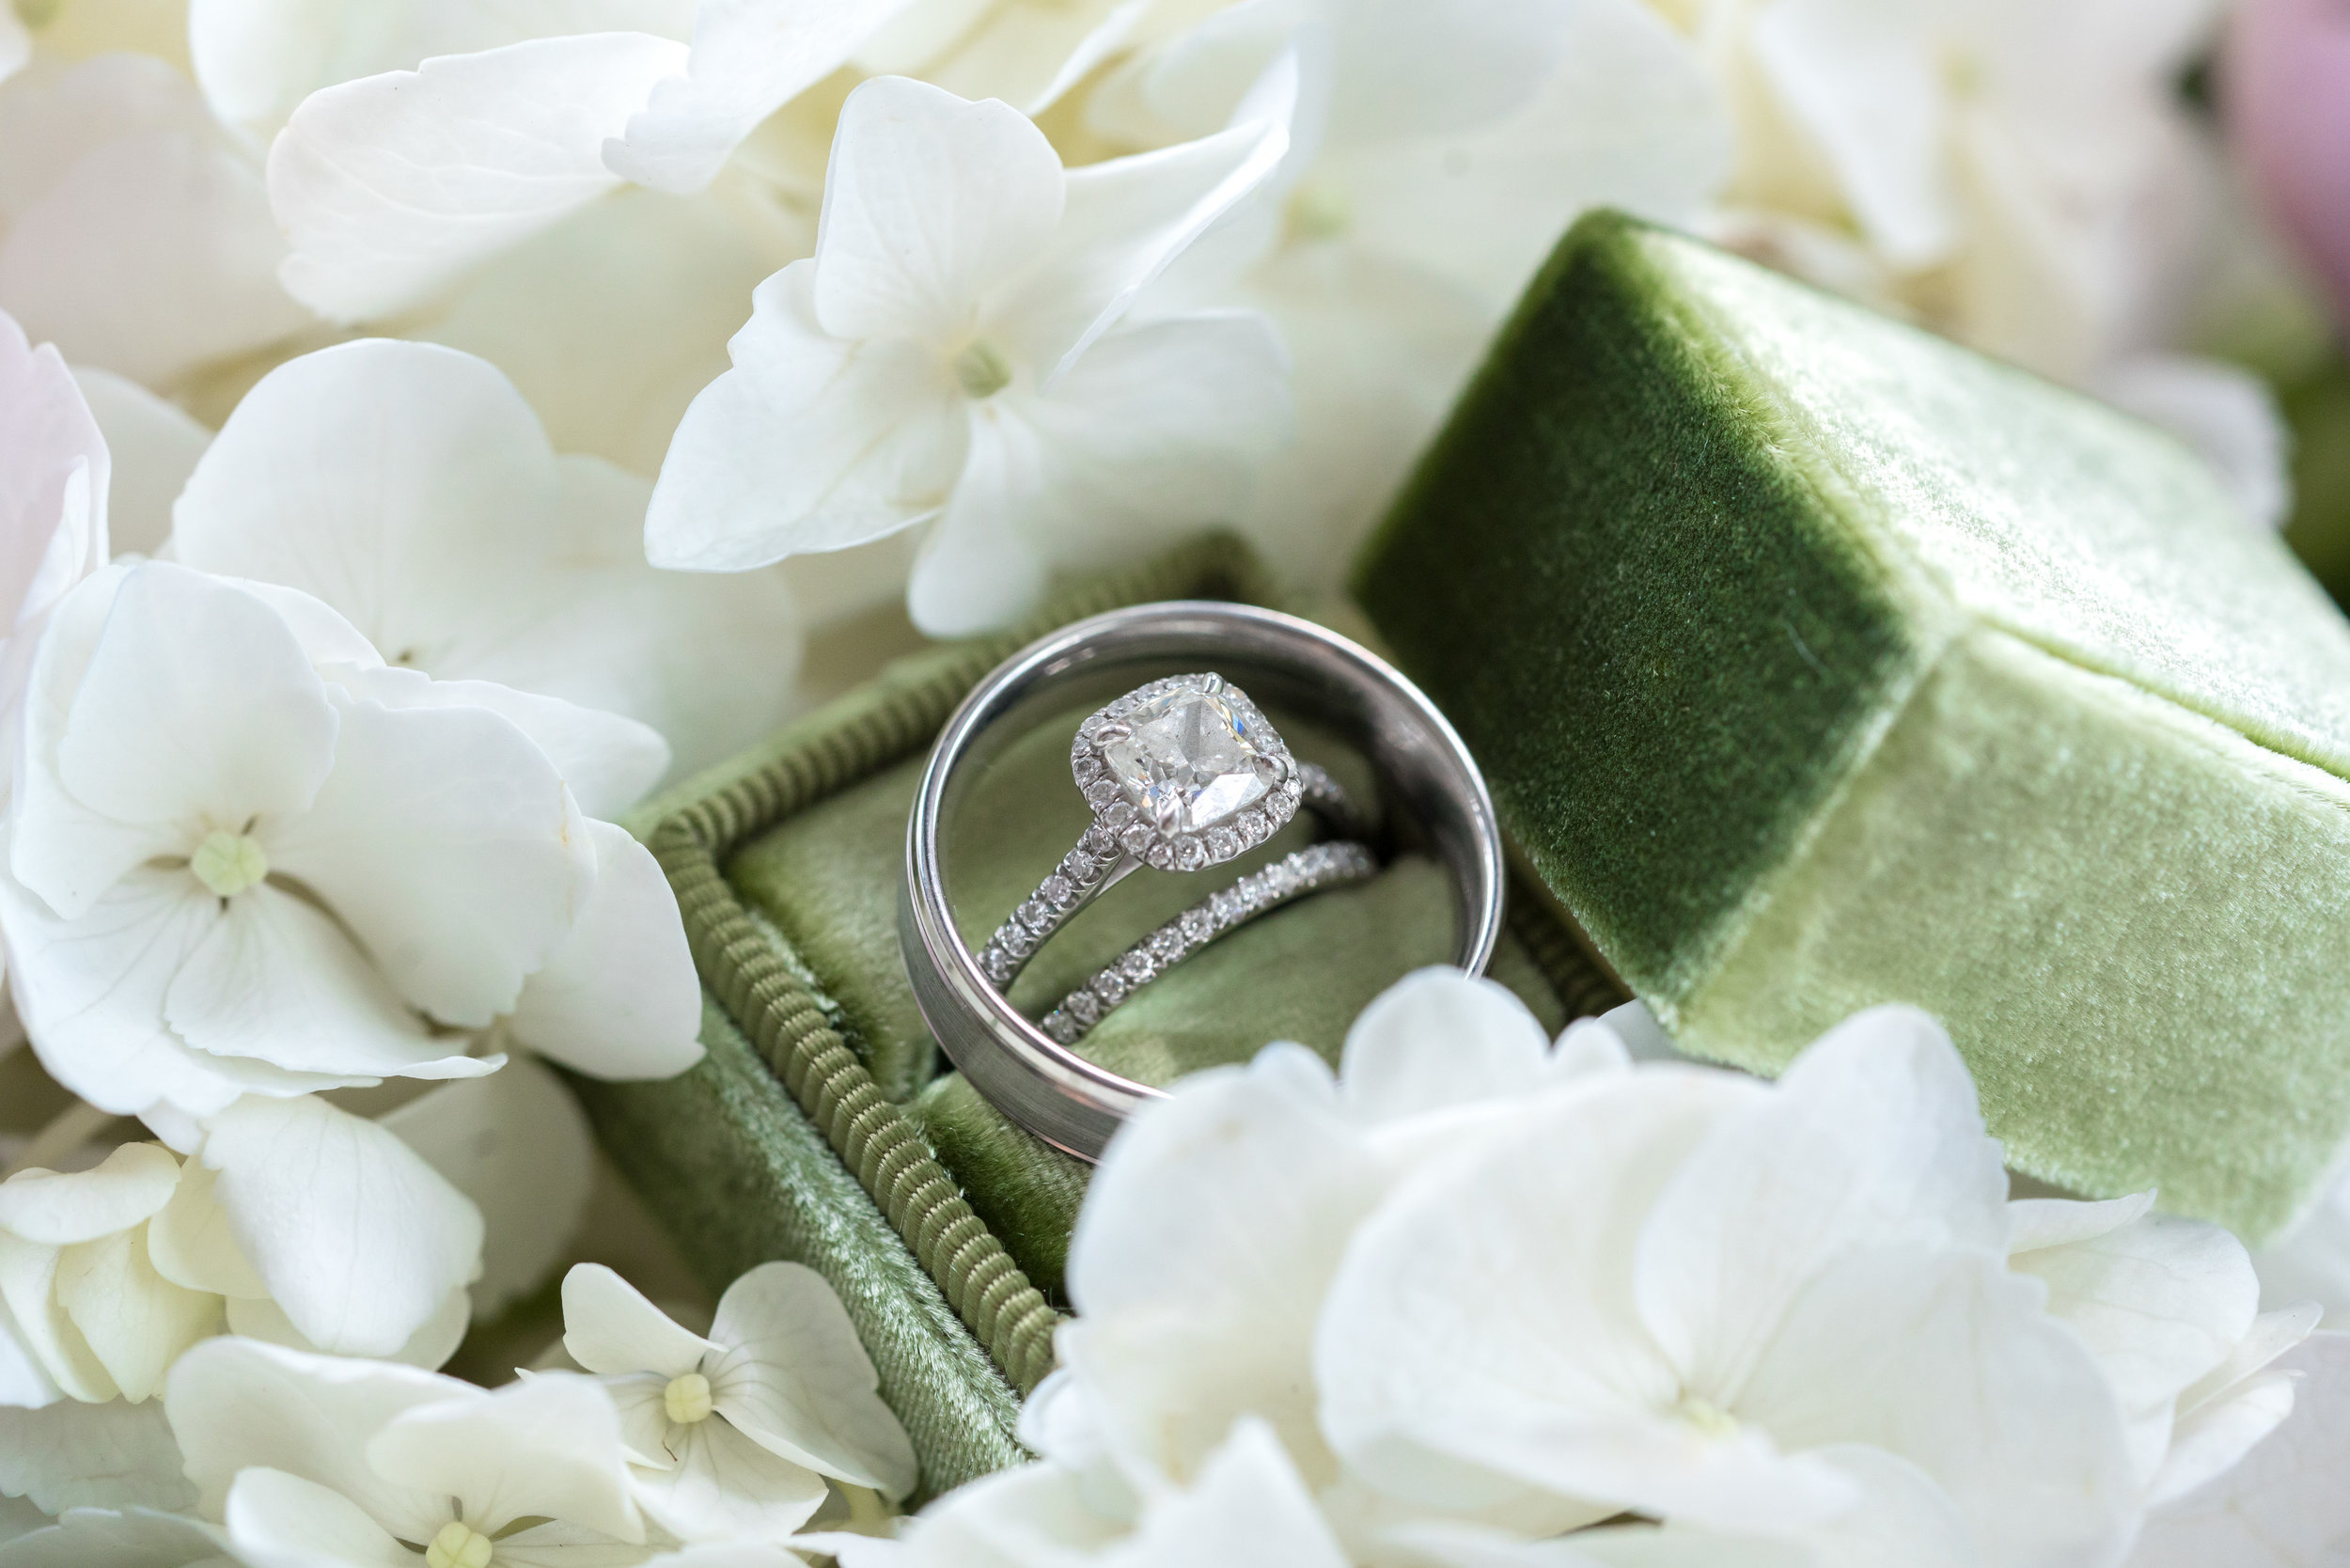 Close up ring shot with 90mm macro lens and Sony a7riii at wedding 